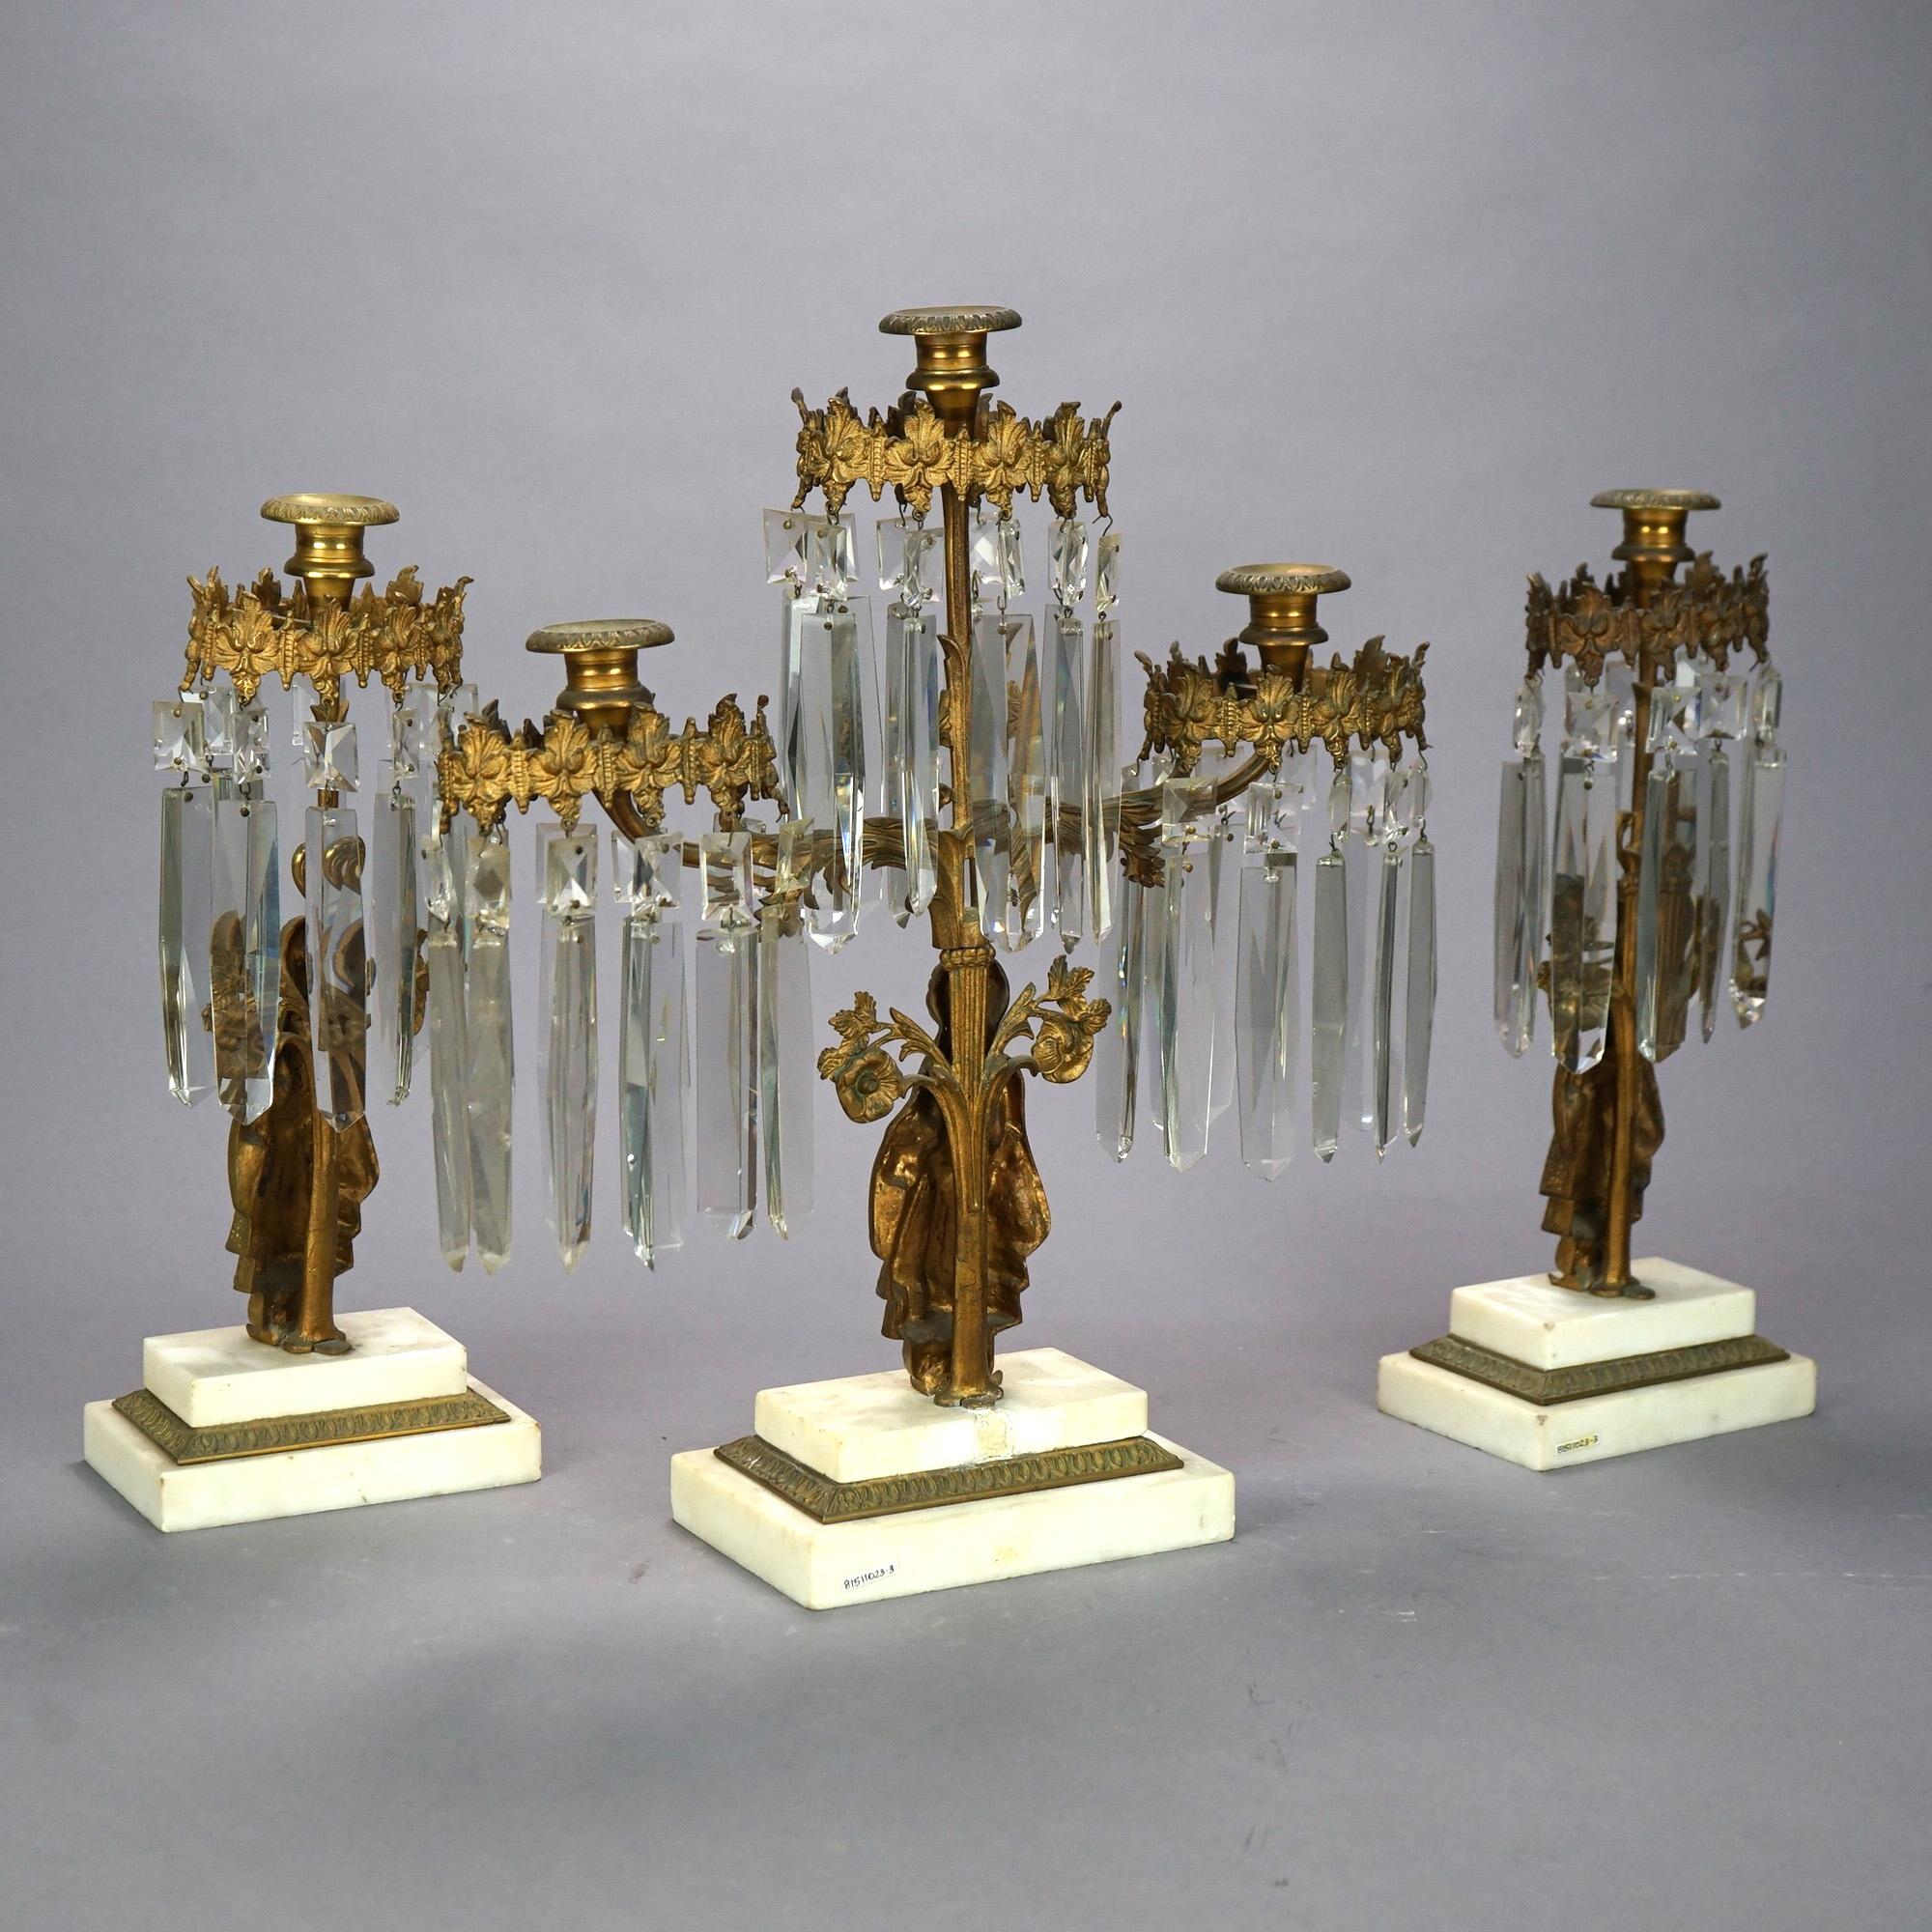 Antique Anglo-Indian Figural Brass & Marble Girandole Candelabra Set, circa 1890 In Good Condition For Sale In Big Flats, NY